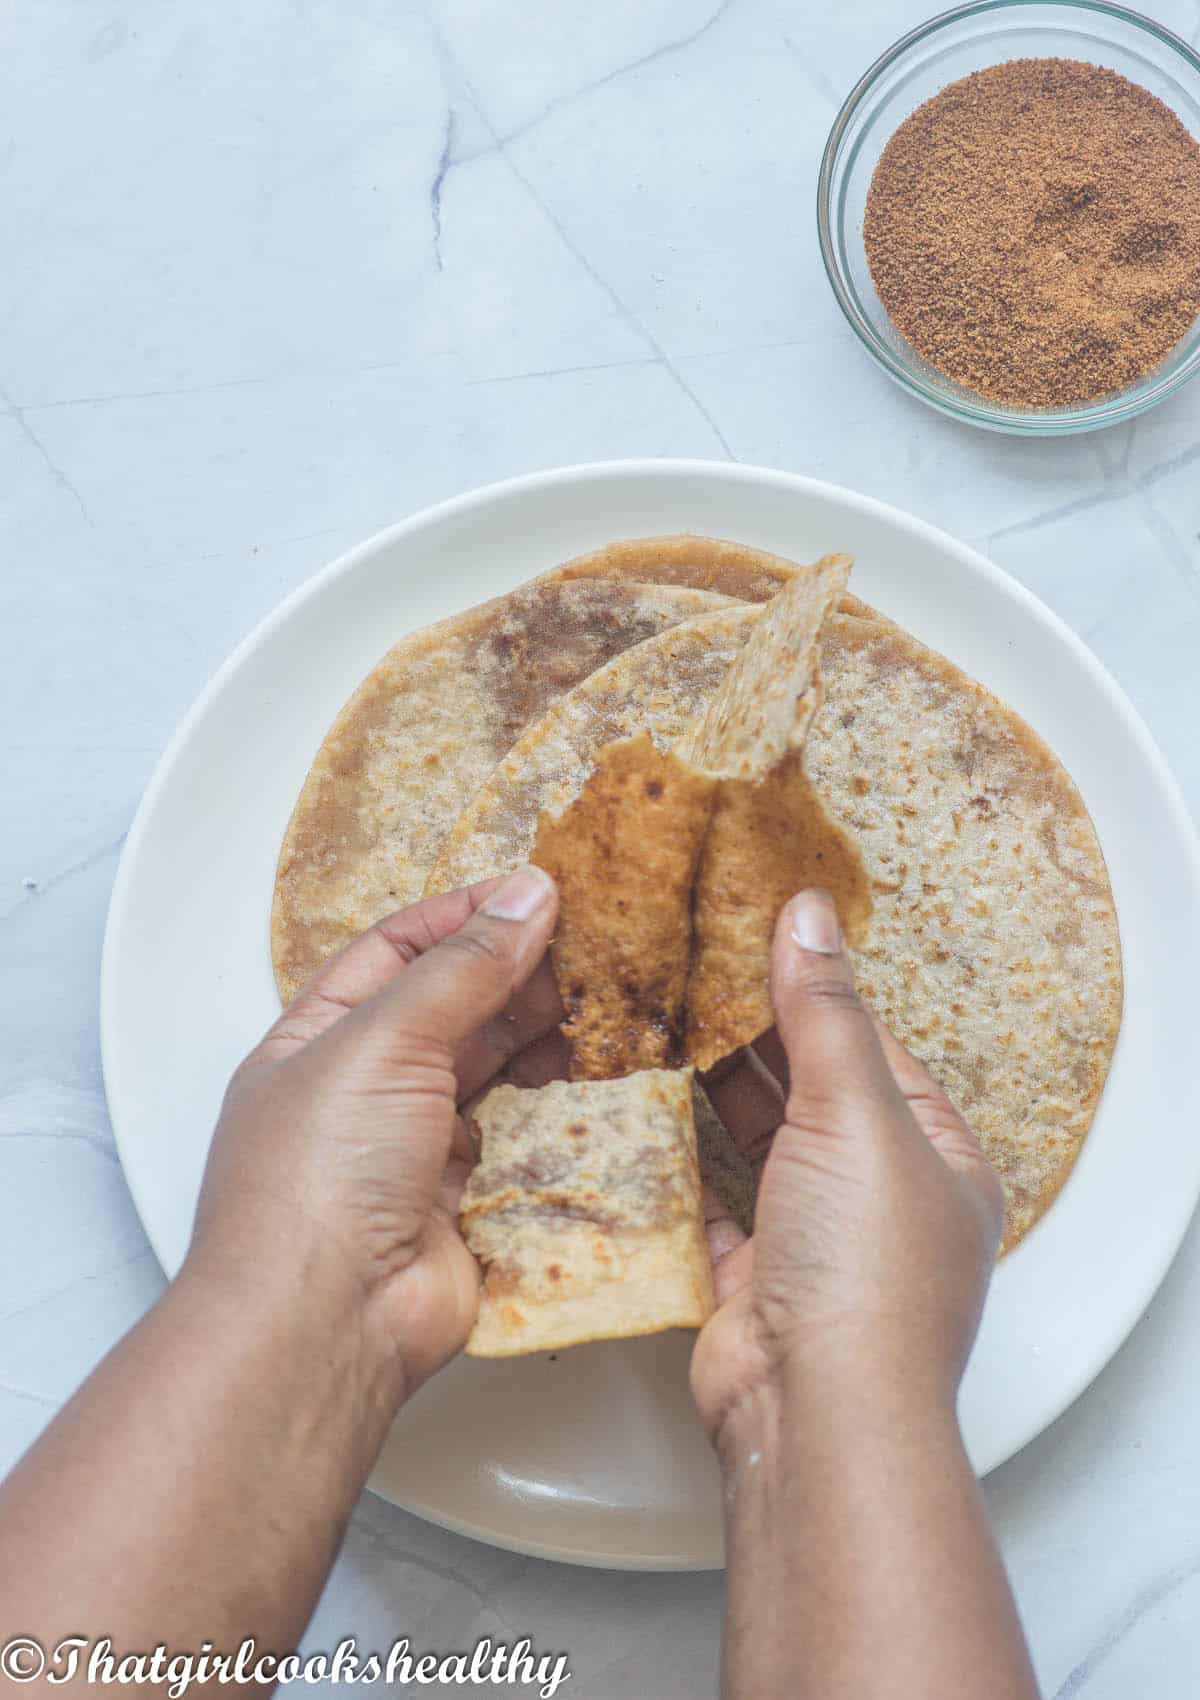 A pair of hands opening up the roti.